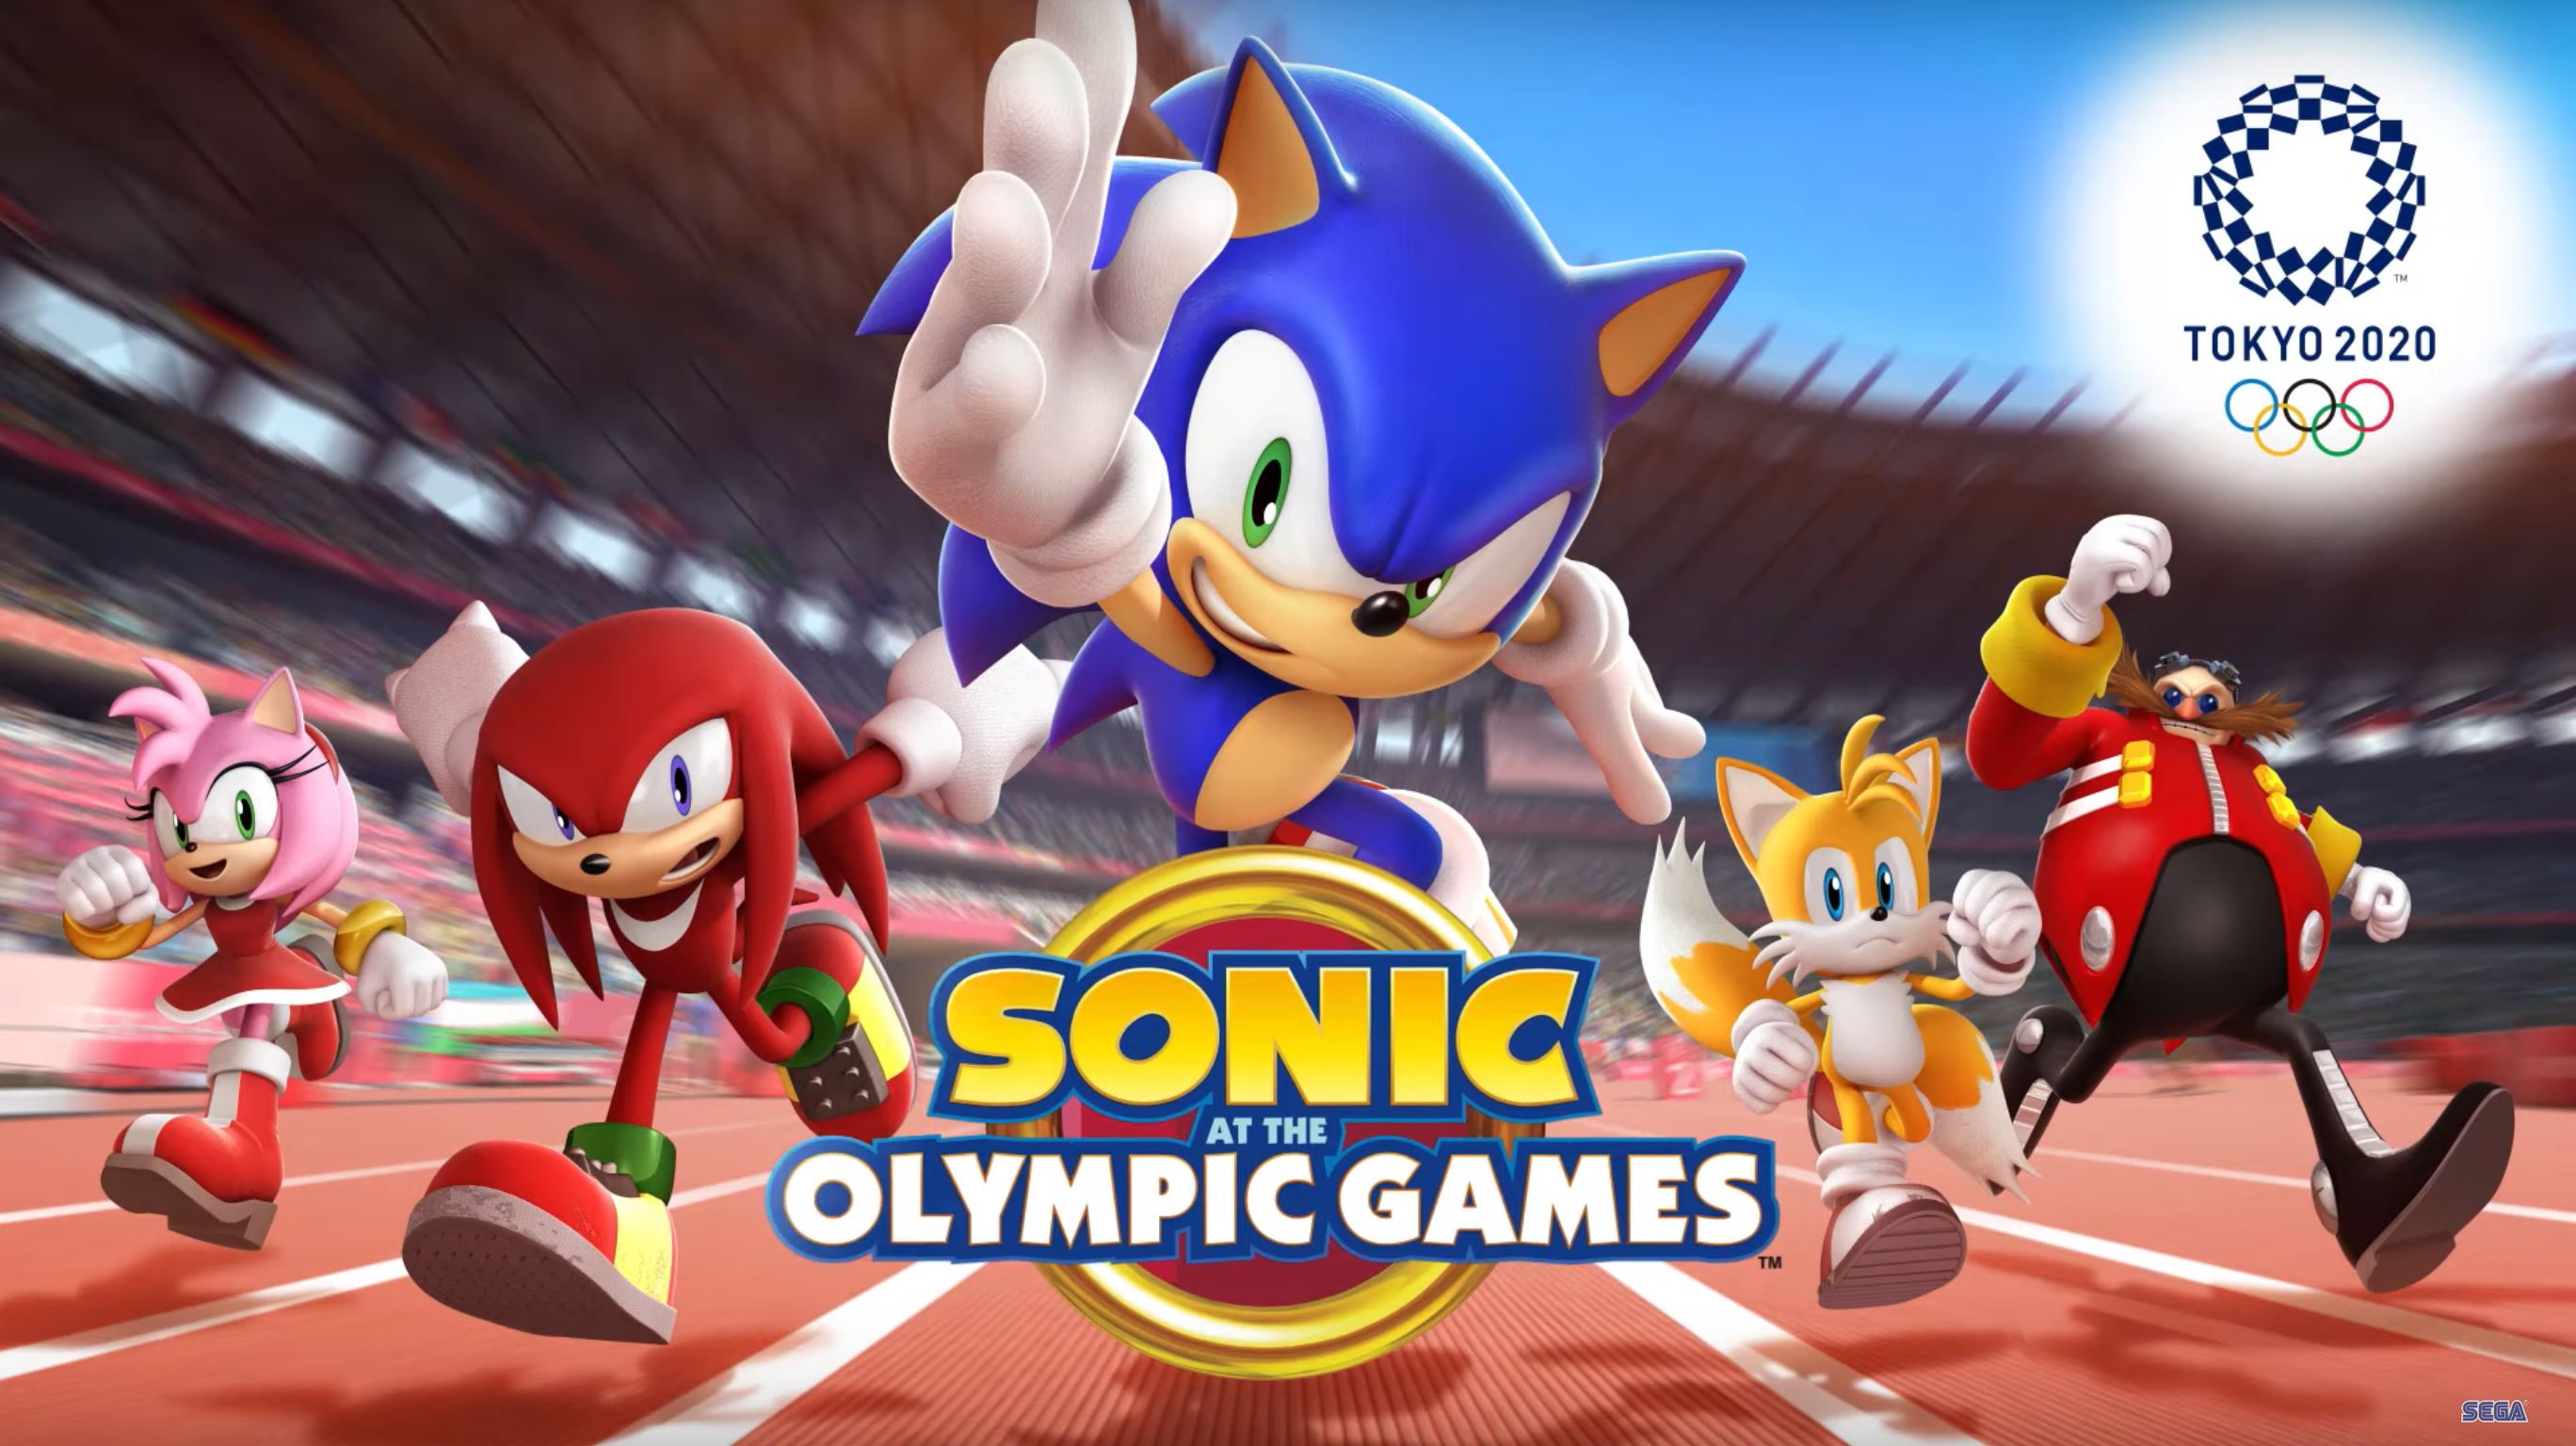 Free Sonic Olympic Games Tokyo 2020 Game Coming To Mobile